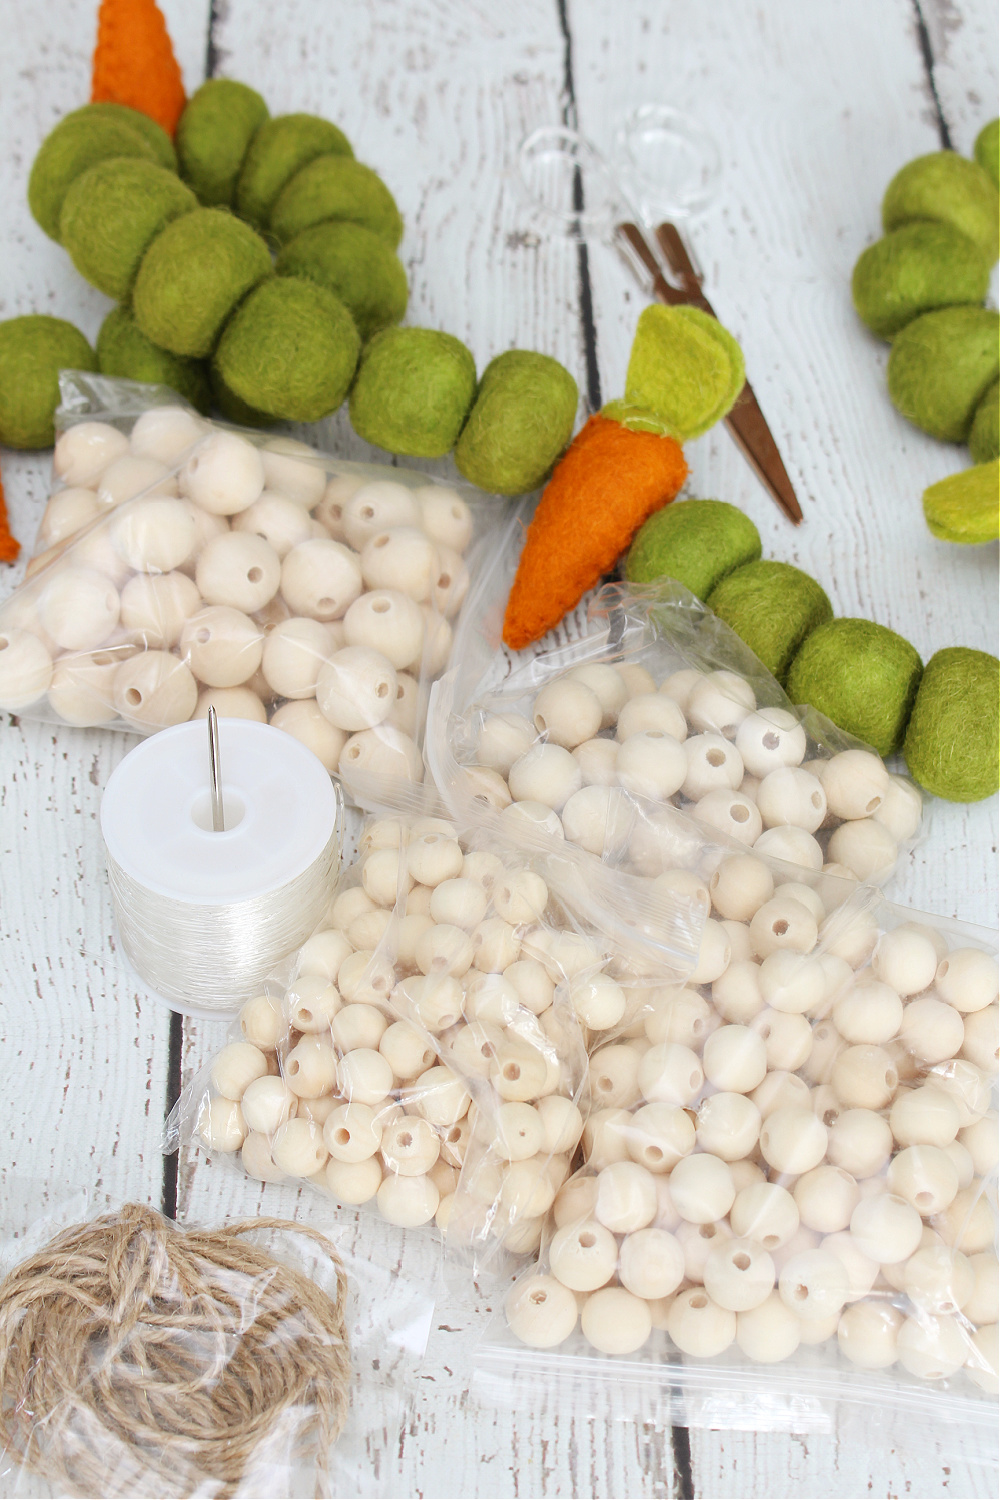 Materials for a DIY felted carrot and wood bead Easter garland.